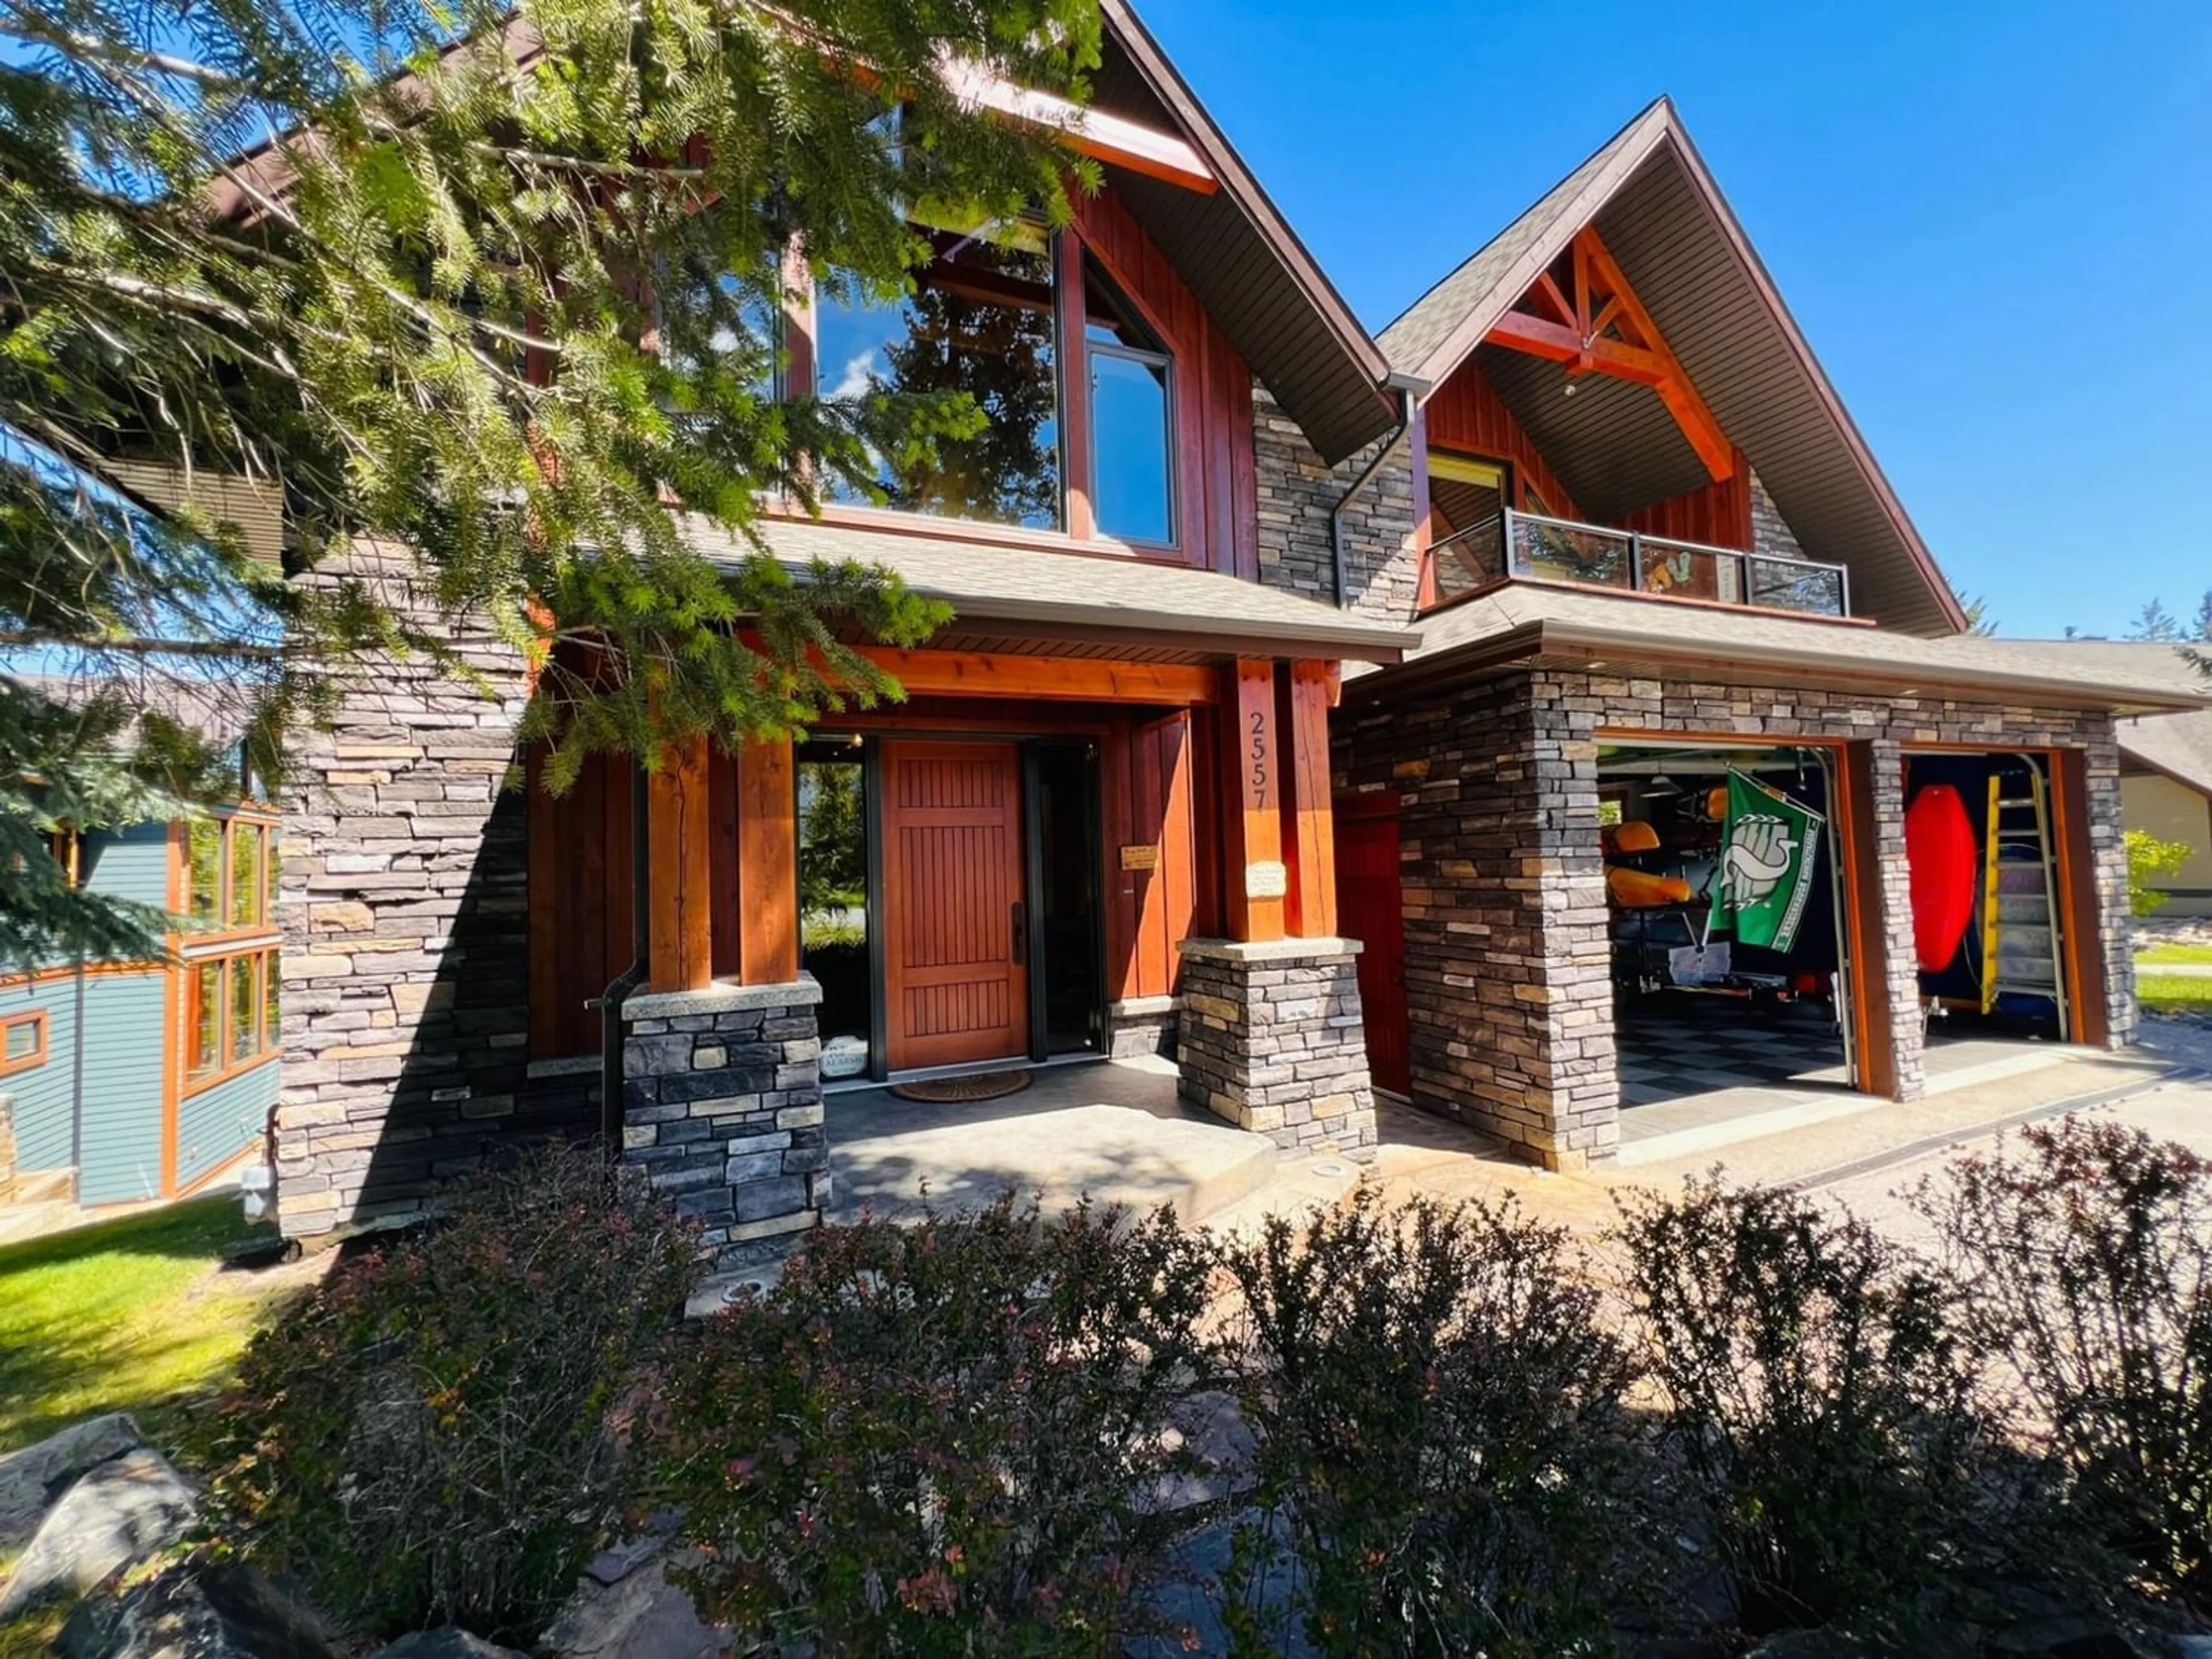 Home with brick exterior material for 2557 LEDGEROCK RIDGE, Invermere British Columbia V0A1K6